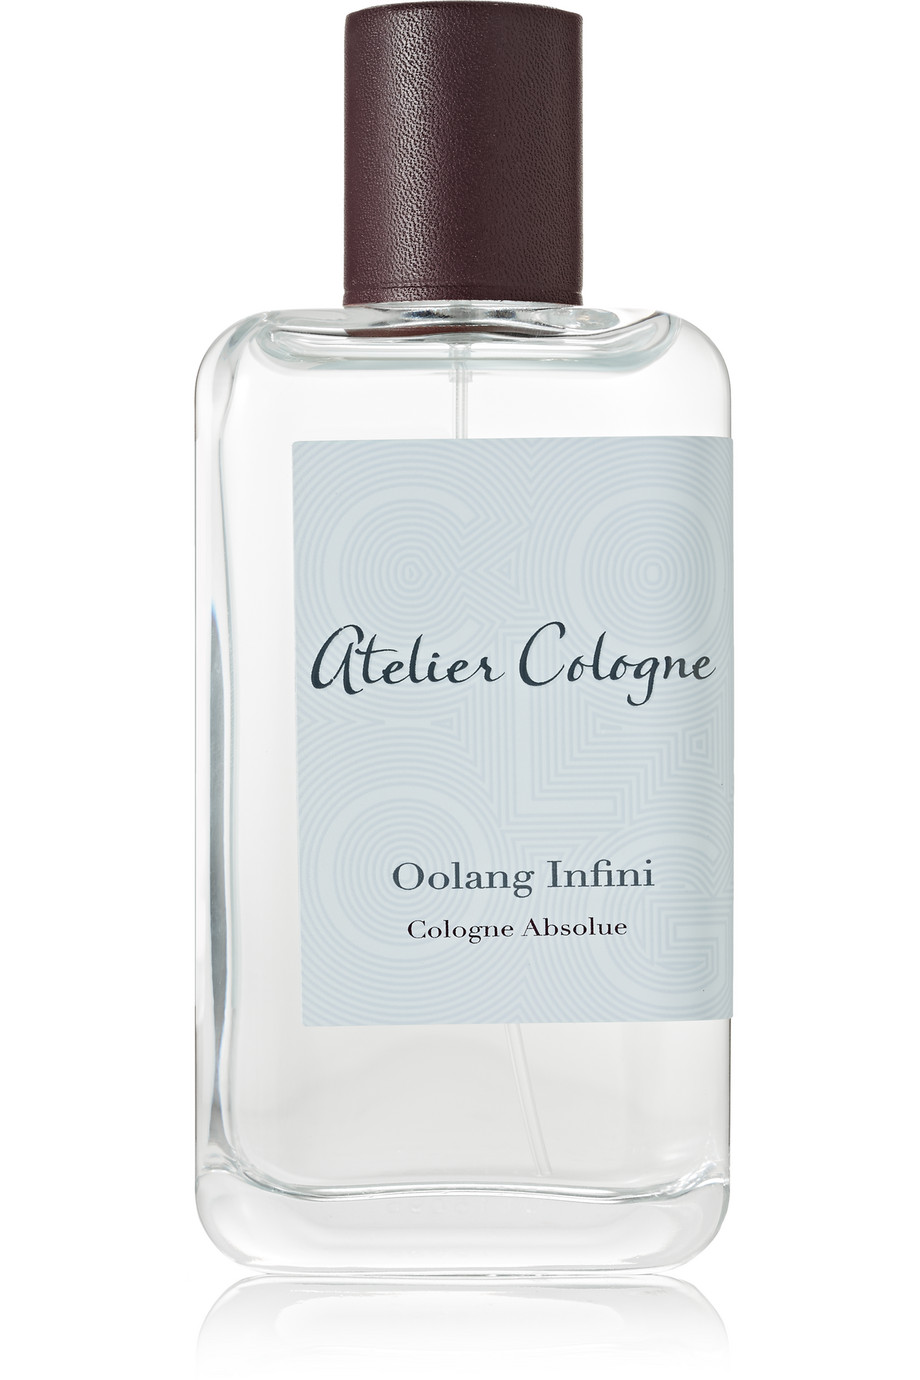 ATELIER COLOGNE OOLANG INFINI